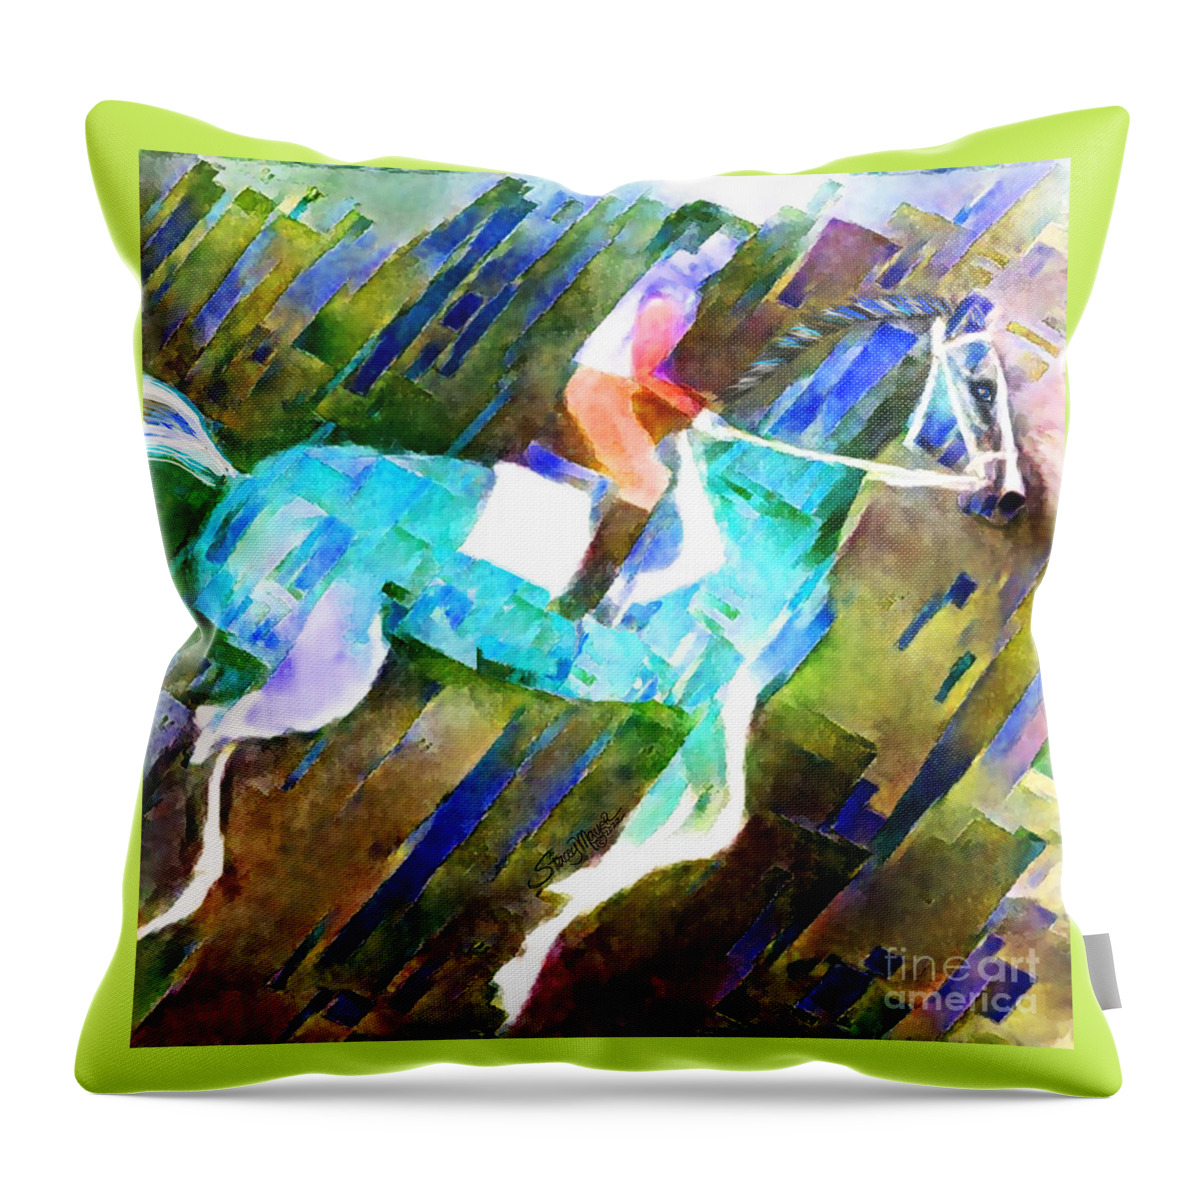 Equestrian Art Throw Pillow featuring the digital art Backstretch Thoroughbred 005 by Stacey Mayer by Stacey Mayer